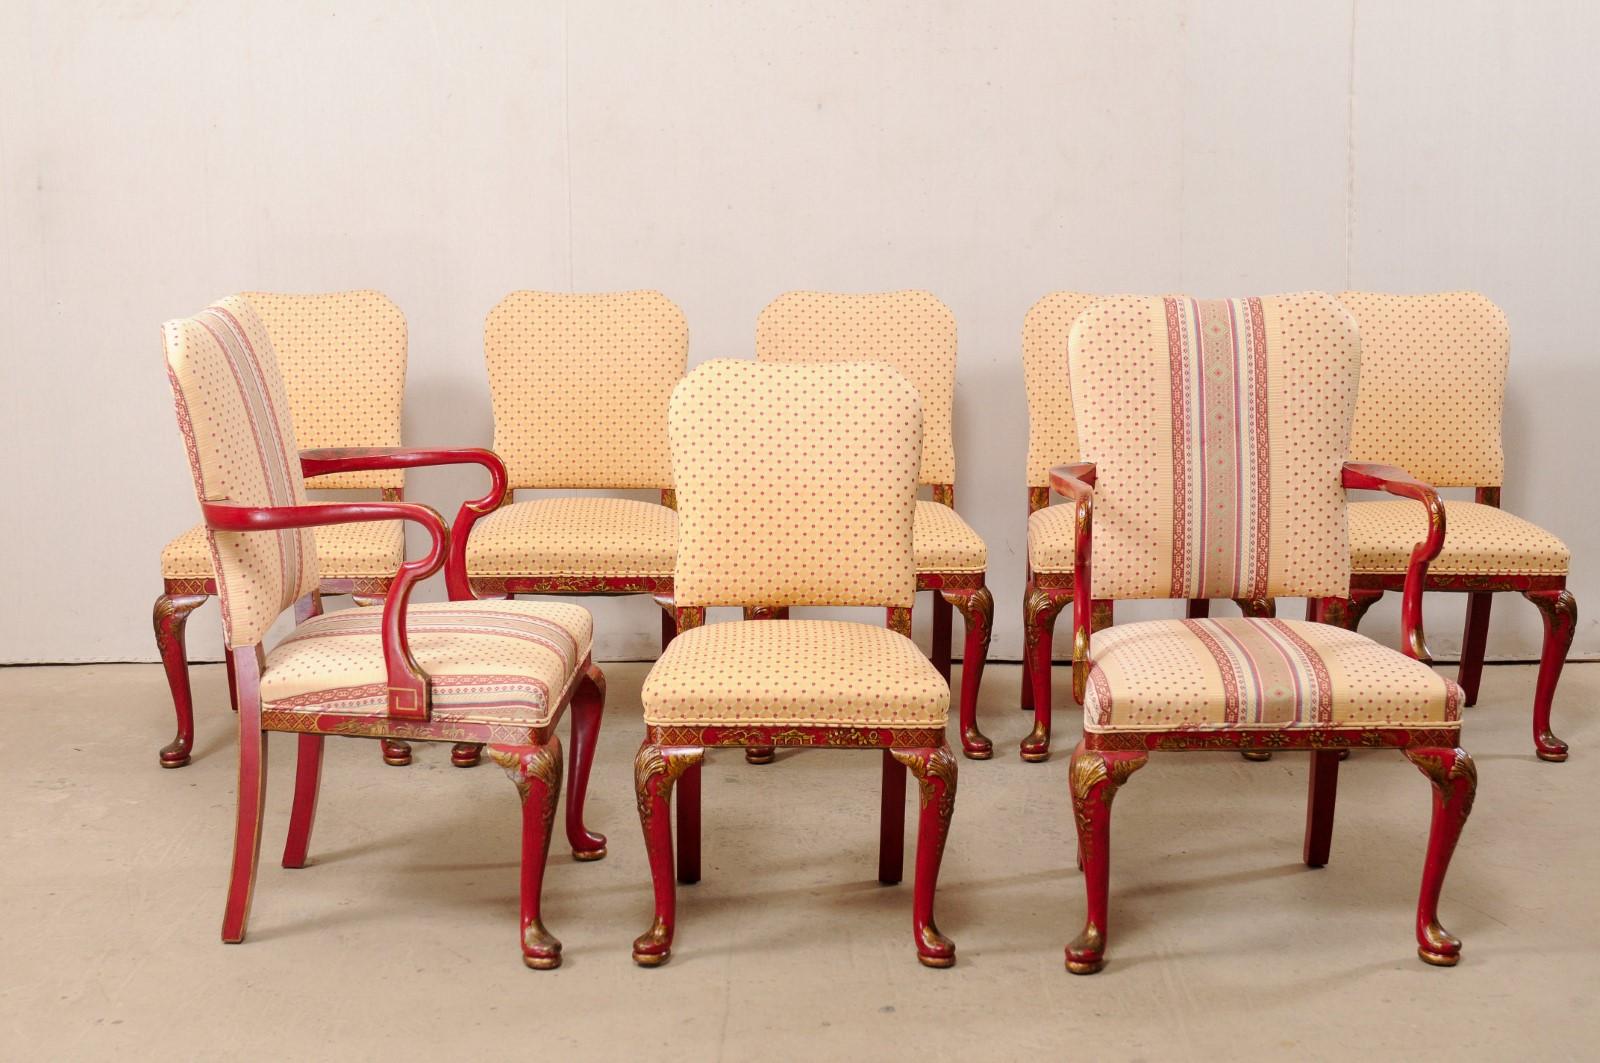 A vintage American set of eight dining chairs with hand painted chinoiserie. This set of chairs, which consist of 2 armchairs and six side chairs, feature upholstered seats and backs, with red and gold tone painted wood frames, in a lovely